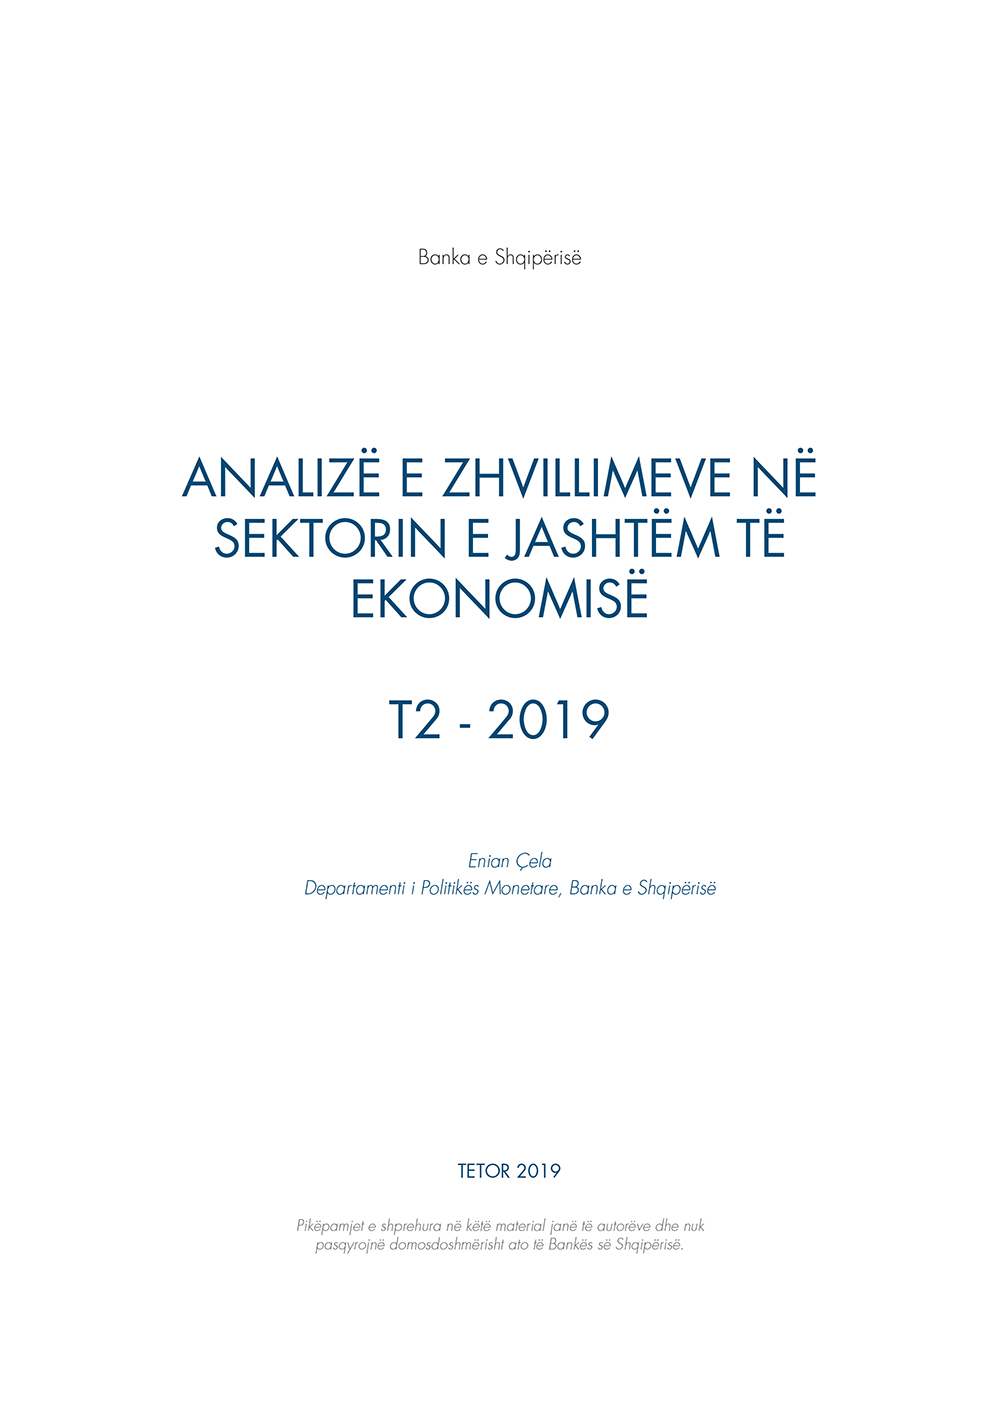 Analysis of developments in the external sector of the economy 2019 Q2